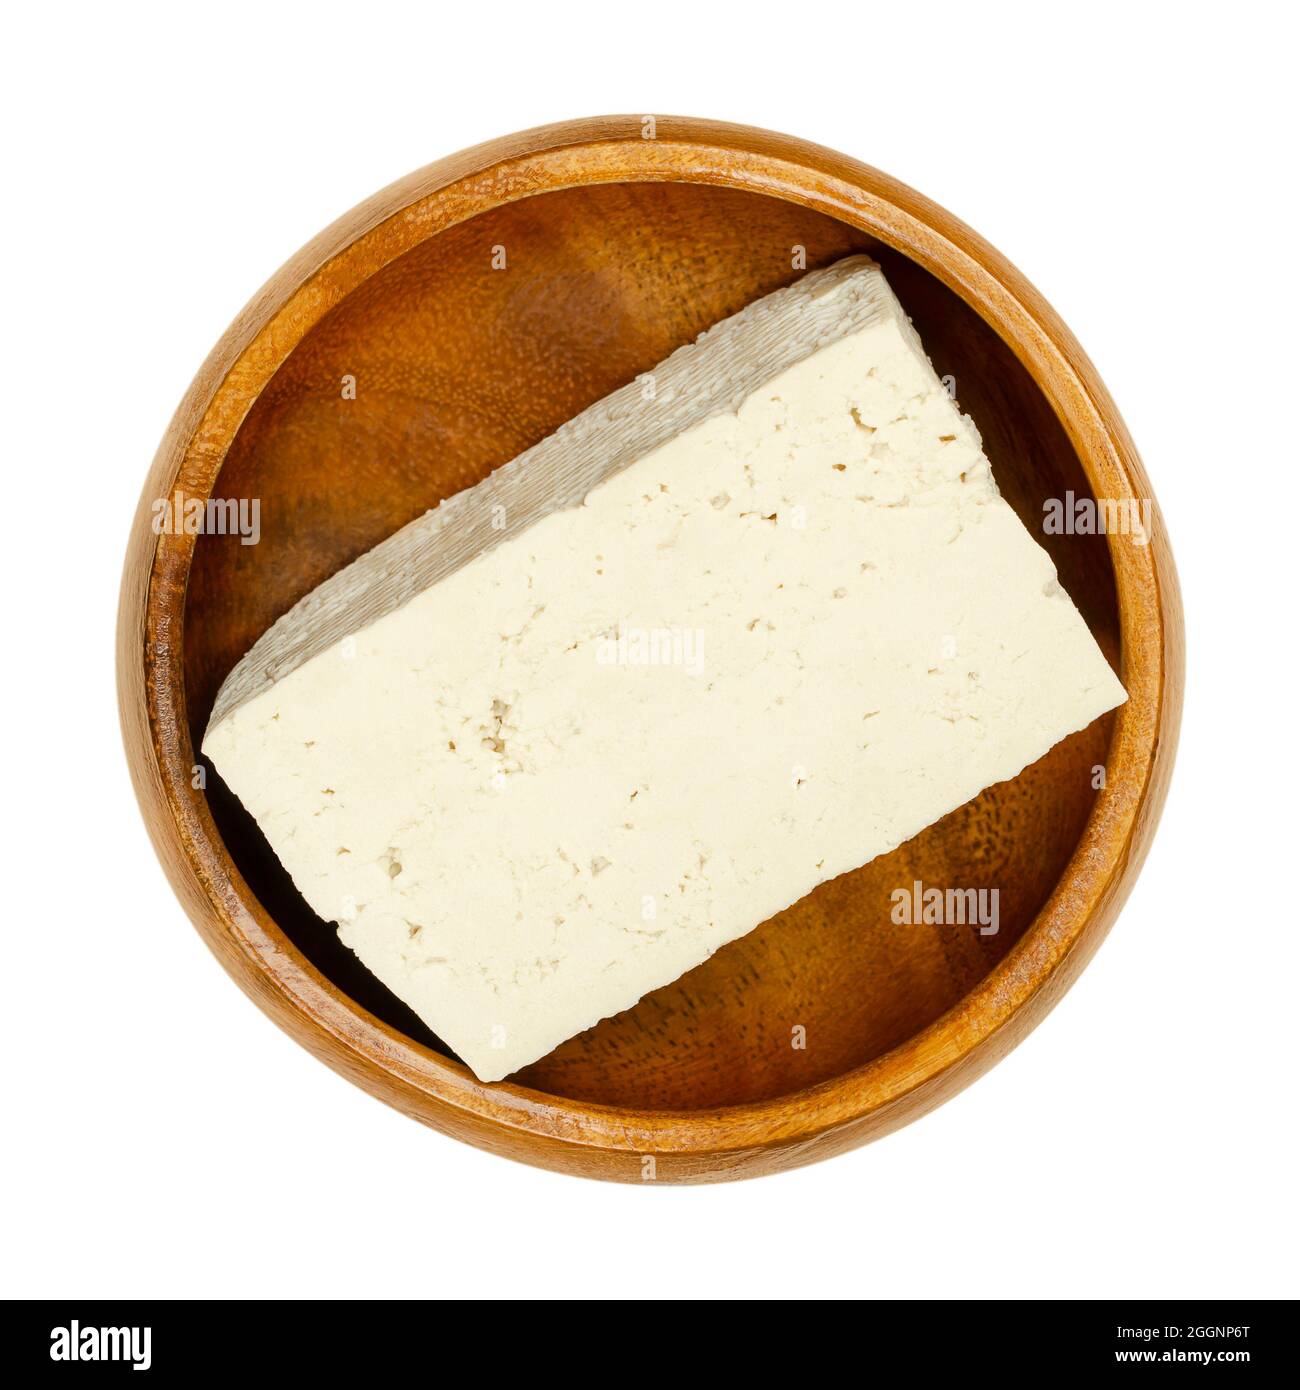 Block of white tofu, in a wooden bowl. Bean curd, coagulated soy milk, pressed into white blocks of different softness. Component of Asian cuisine. Stock Photo